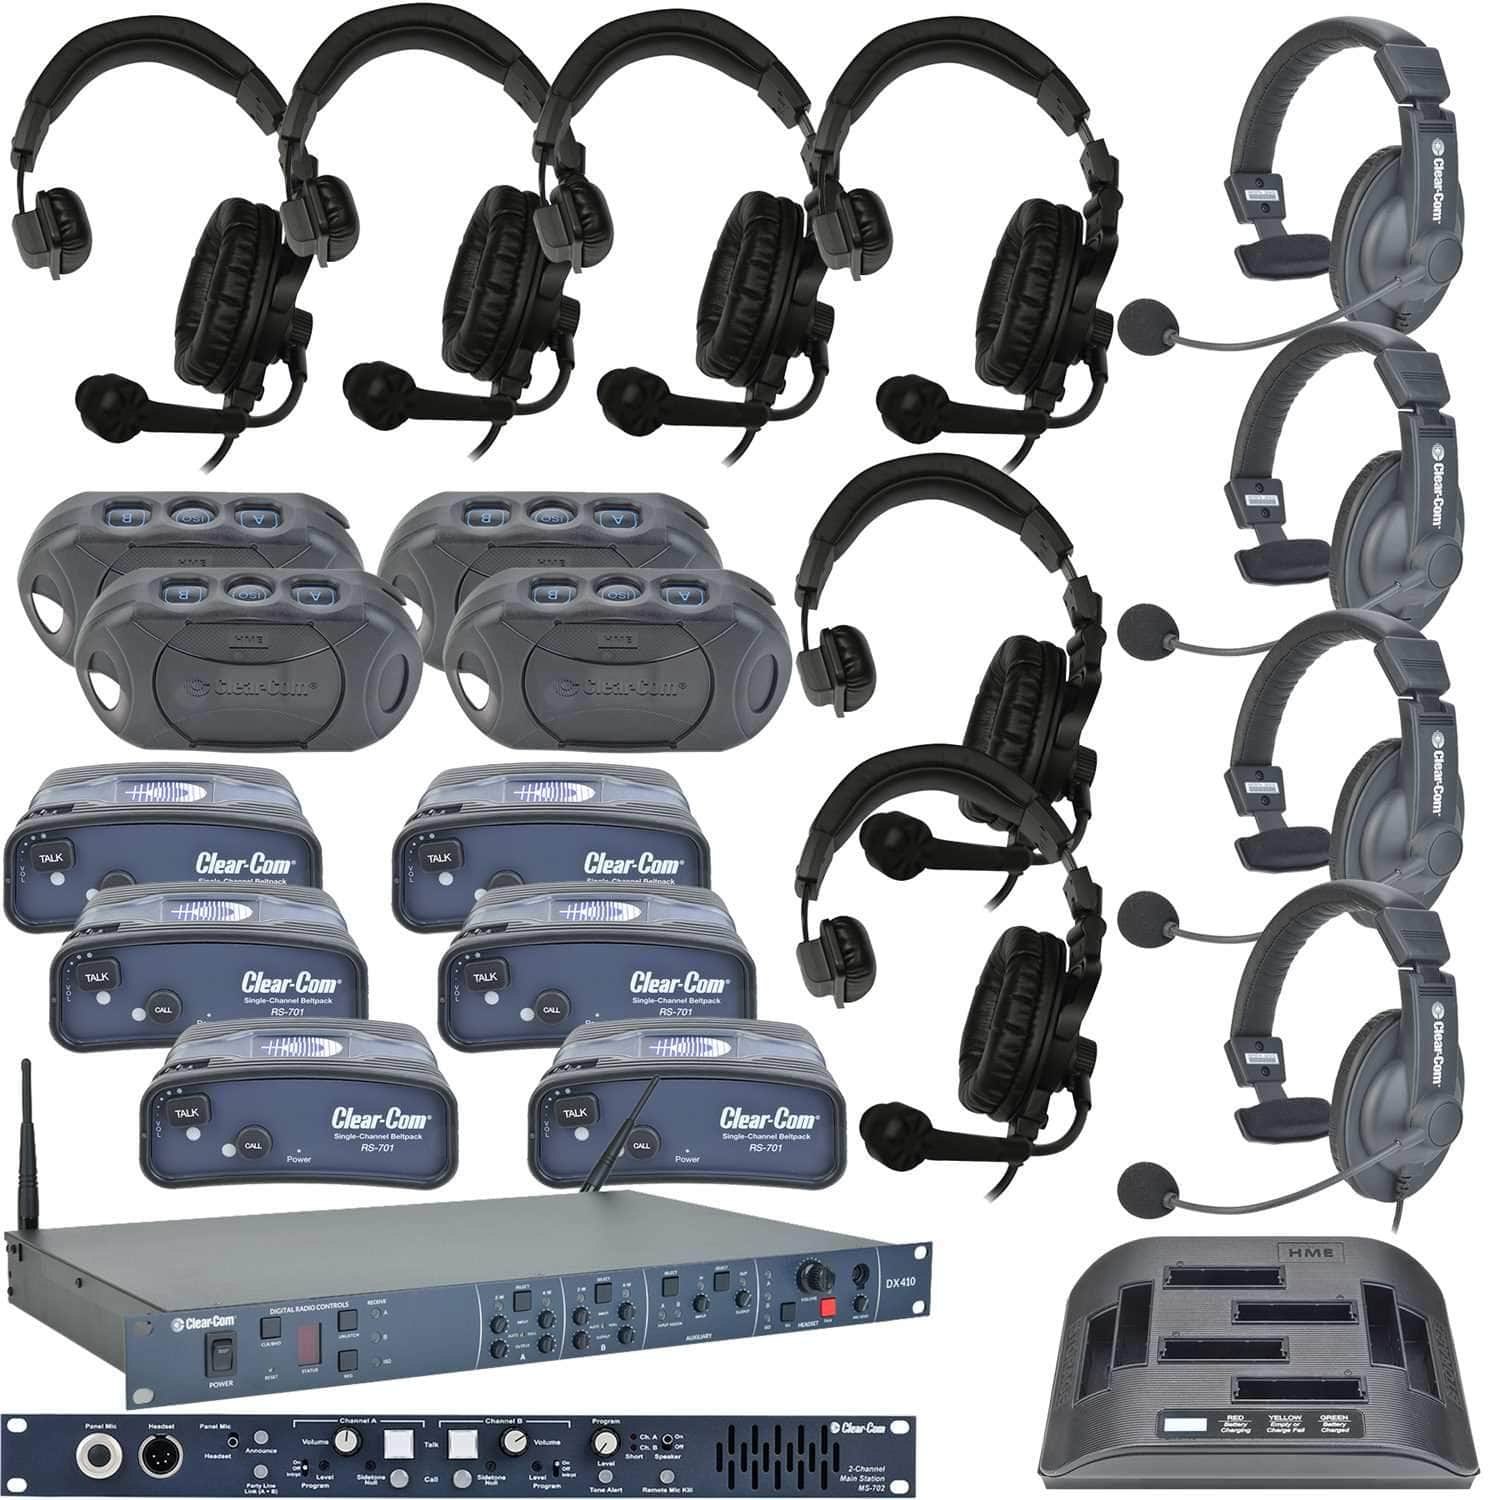 Clear-Com Intercom System Combo Wired Plus Wireless Bundle with 10 Headsets